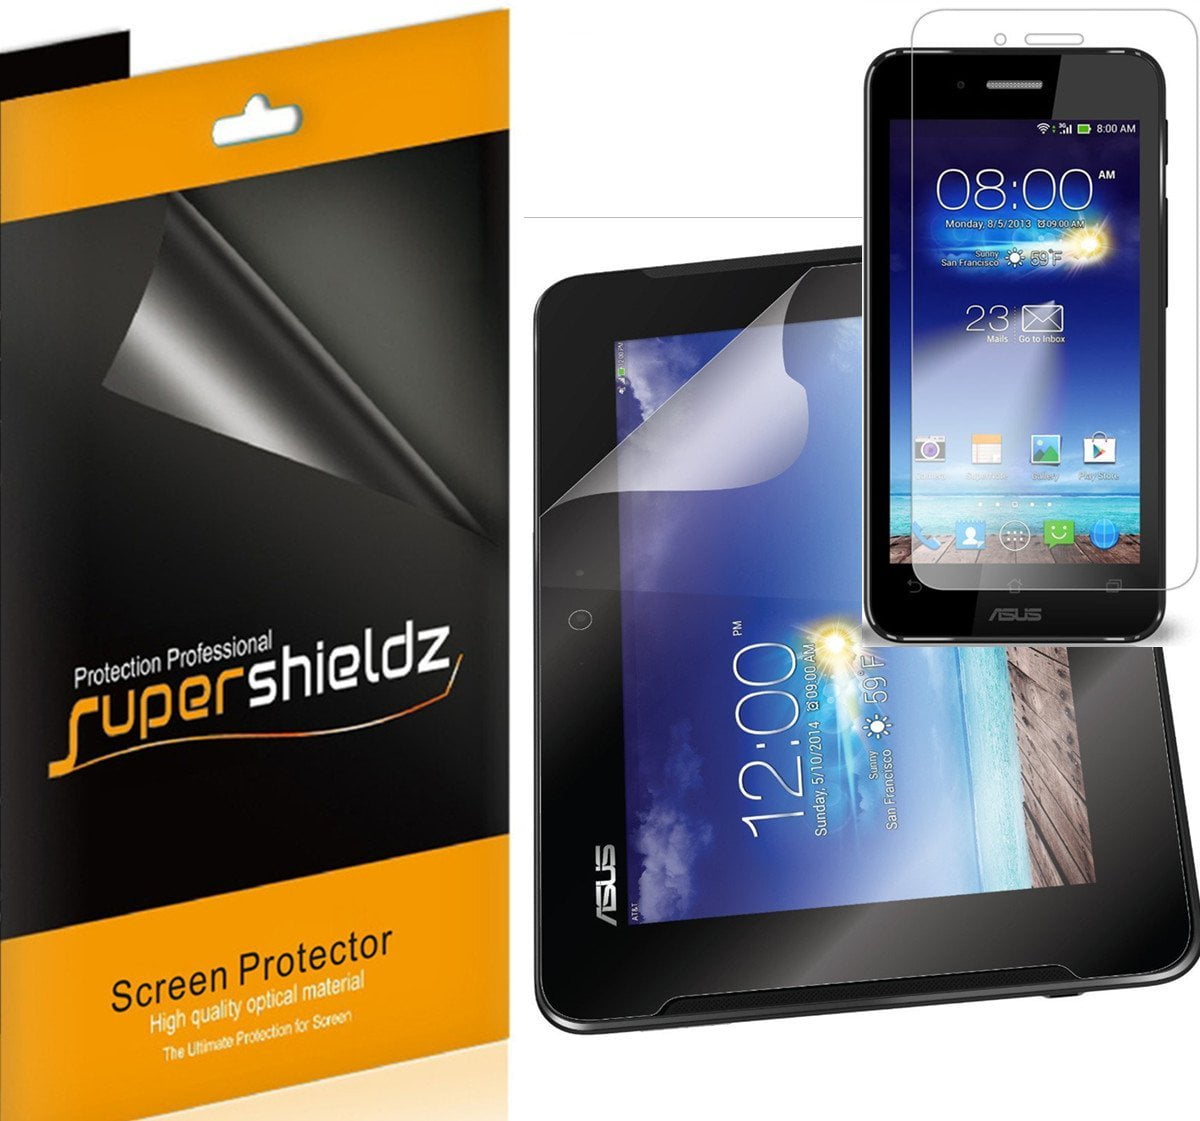 [3-Pack] Supershieldz for Asus Padfone X (Tablet + Phone) Screen Protector, Anti-Bubble High Definition (HD) Clear Shield